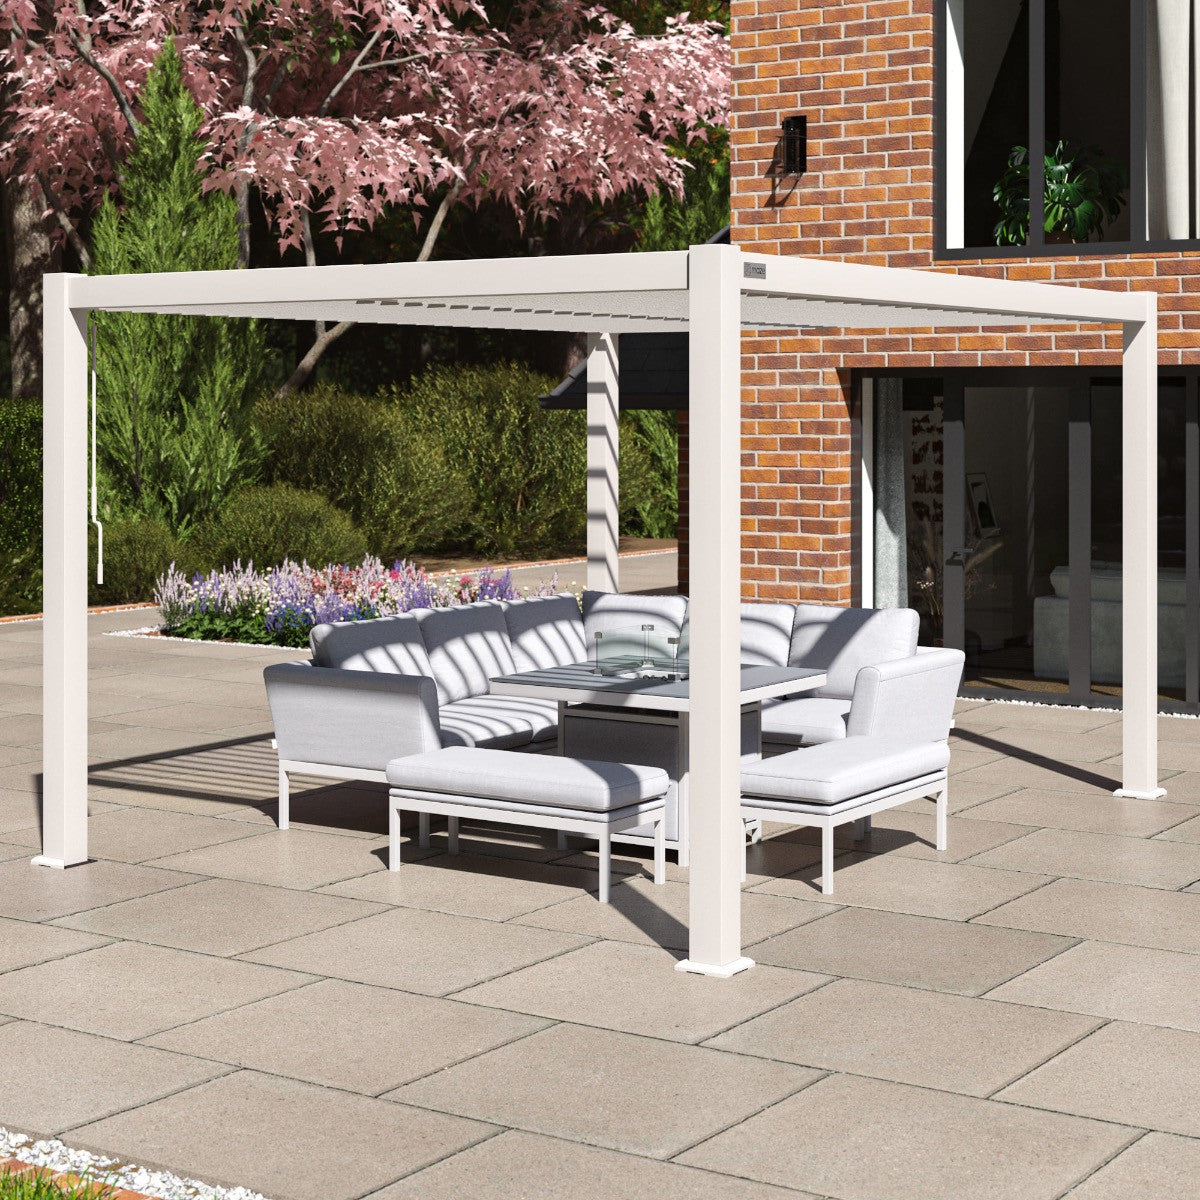 Maze Como Pergola Aluminium Rectangular 30x40 - Frame Only White From Other Side-Better Bed Company